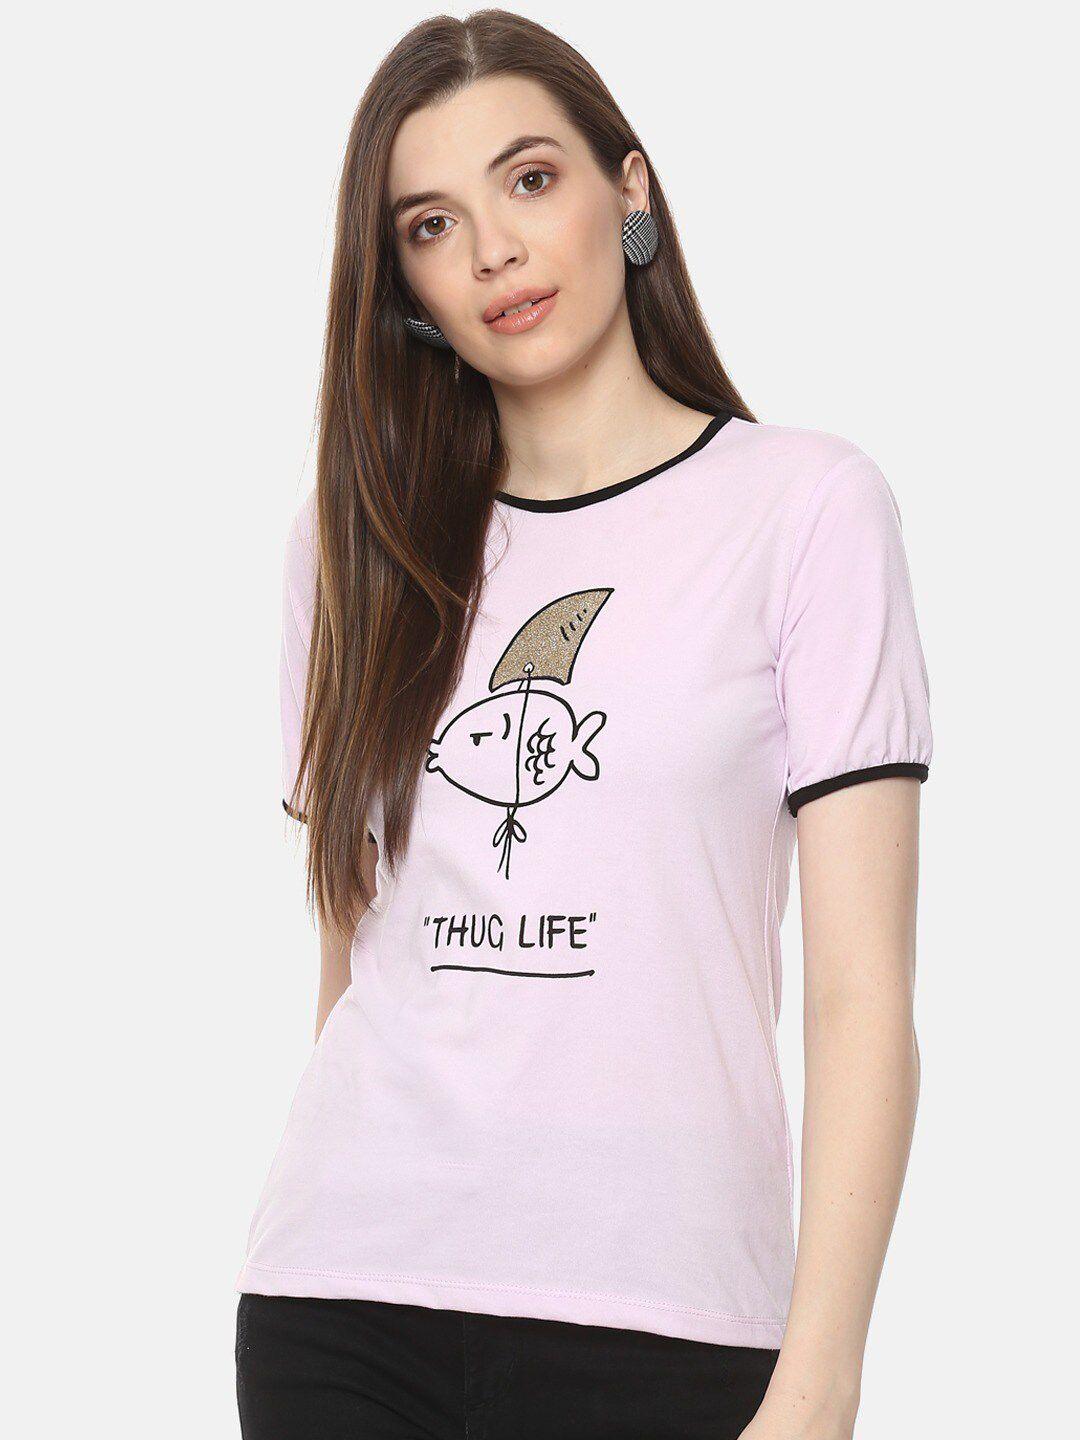 baesd graphic printed short sleeves cotton top